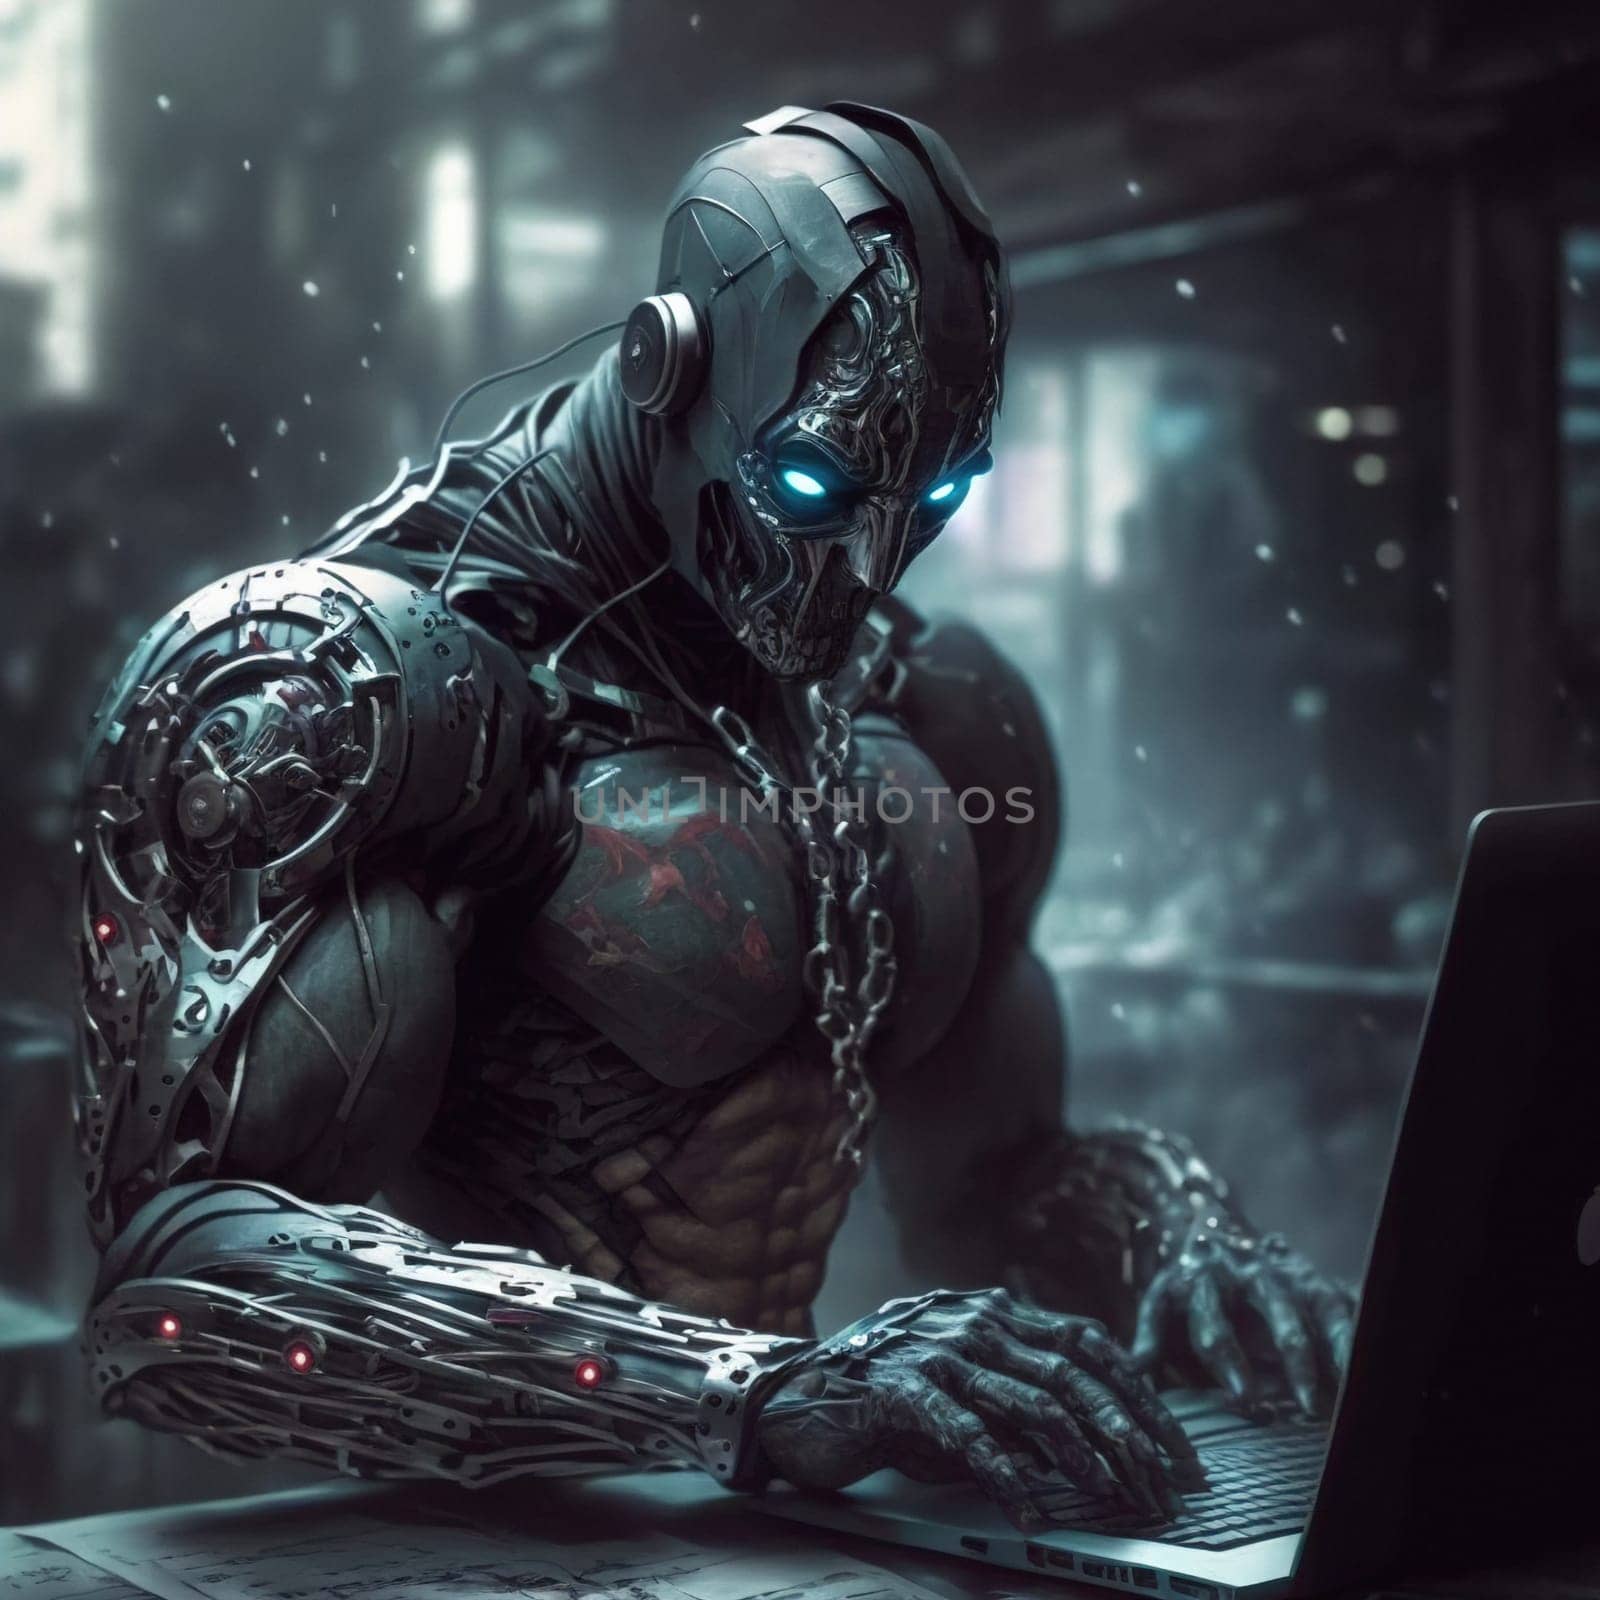 Professional Male Working on Laptop in High-Tech Environment with a Futuristic Vibe by igor010